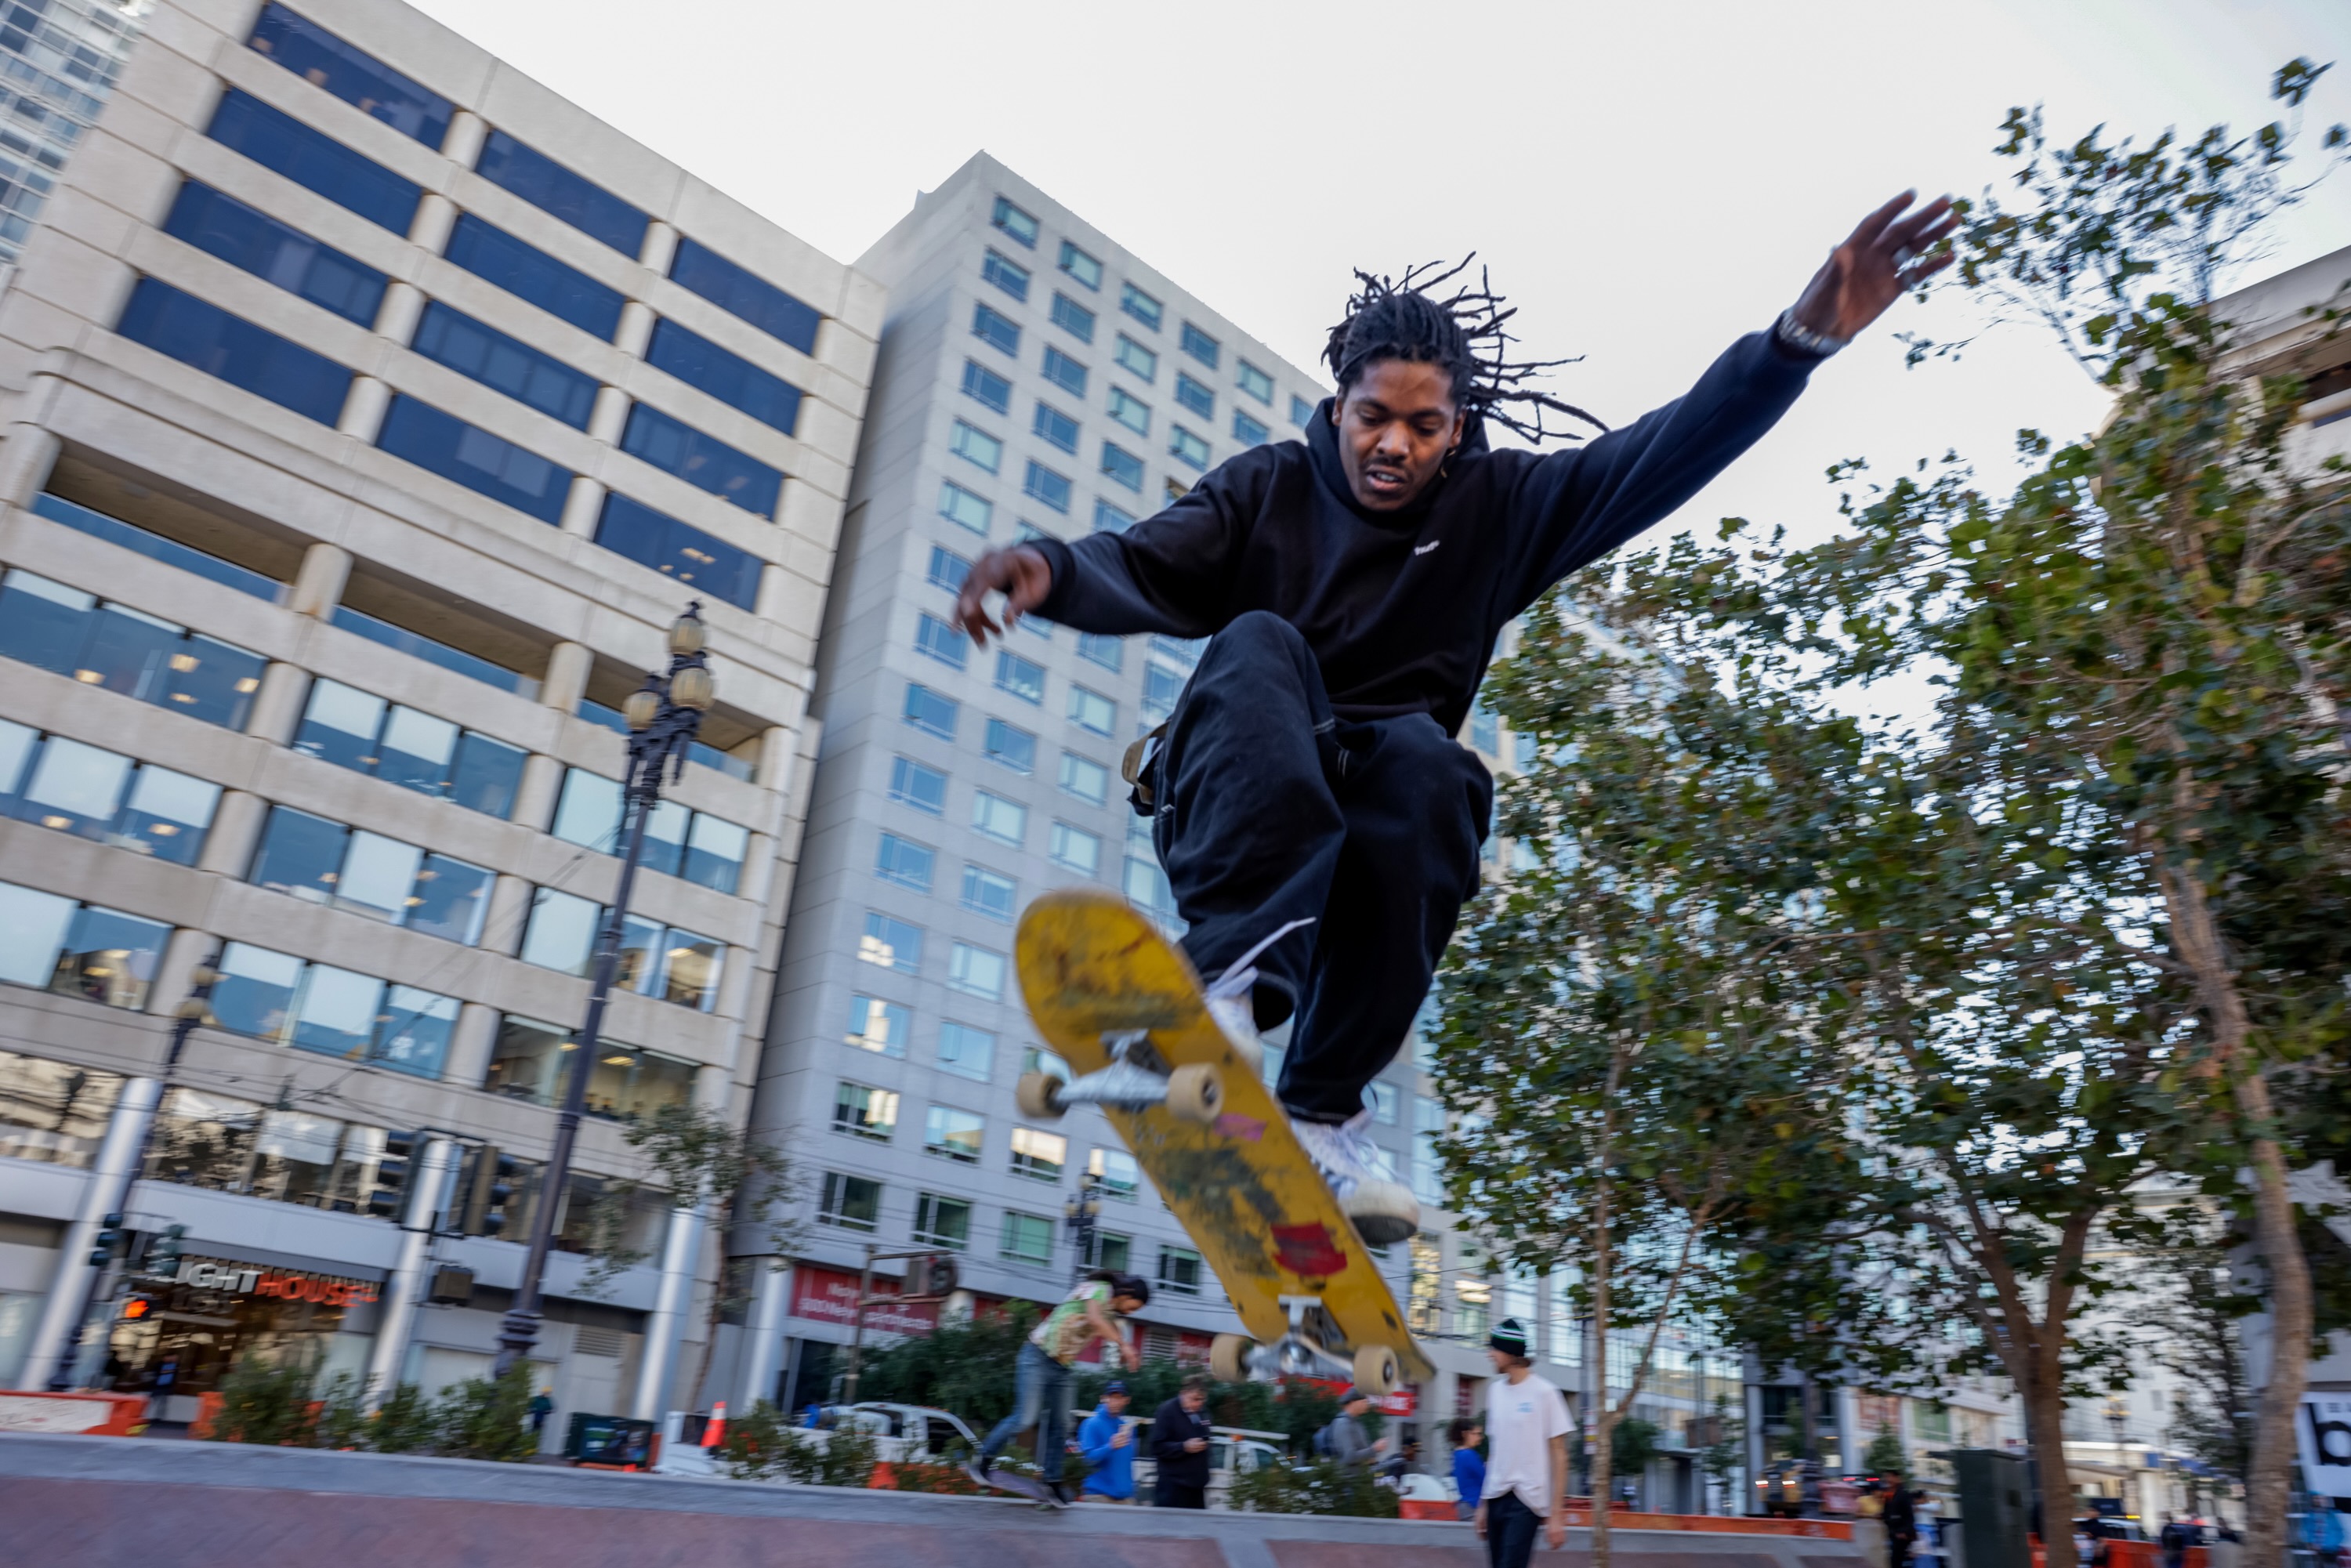 A person on a skateboard does a trick off a jump on a red brick skate park at UN Plaza with large glass buildings in the background in downtown San Francisco.